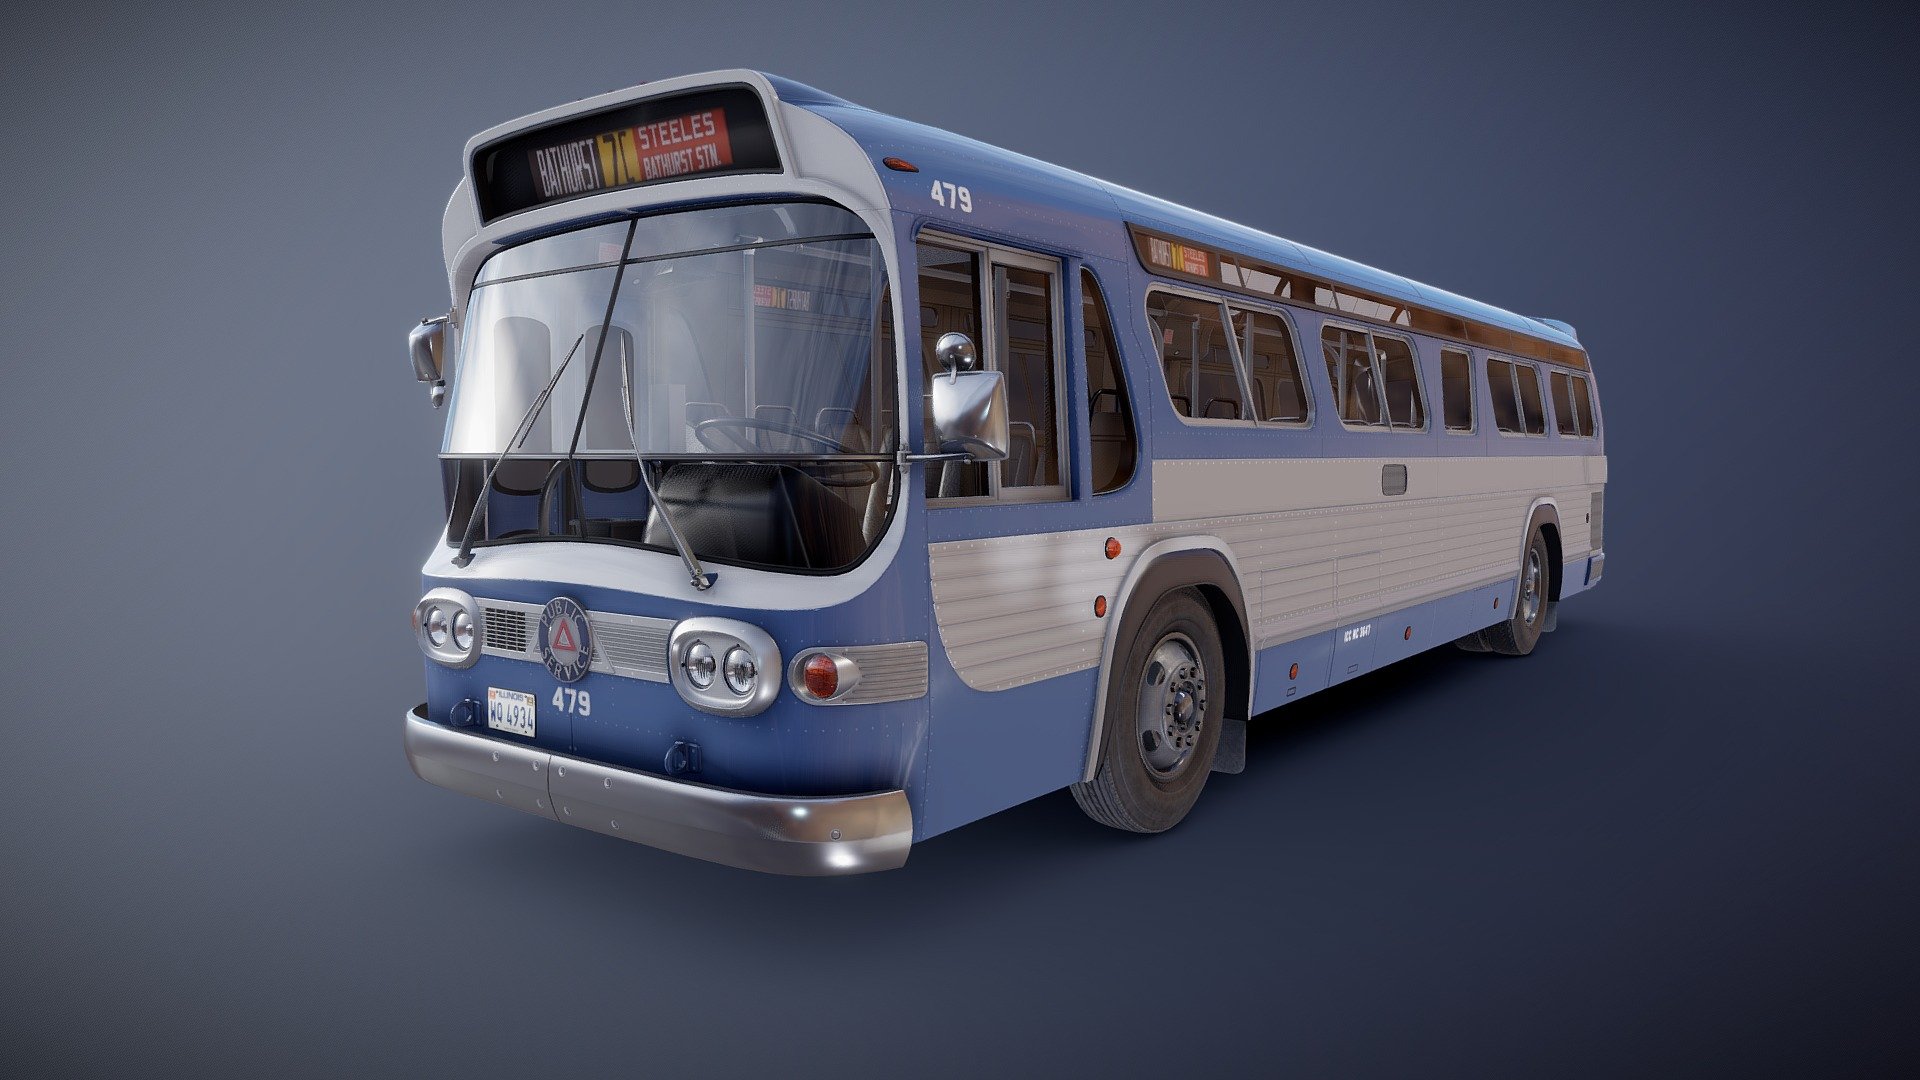 City bus game ready model.

Full textured model with clean topology.

High accuracy exterior model.

Different tires for rear and front wheels.

Doors are openable.

Steering wheel are separeted mesh.

High detailed body - seams, rivets, chrome parts, wipers and etc.

High detailed rims and tires, with PBR maps(Base_Color/Metallic/Normal/Roughness.png2048x2048 )

Model ready for real-time apps, games, virtual reality and augmented reality.

Asset looks accuracy and realistic and become a good part of your project 3d model